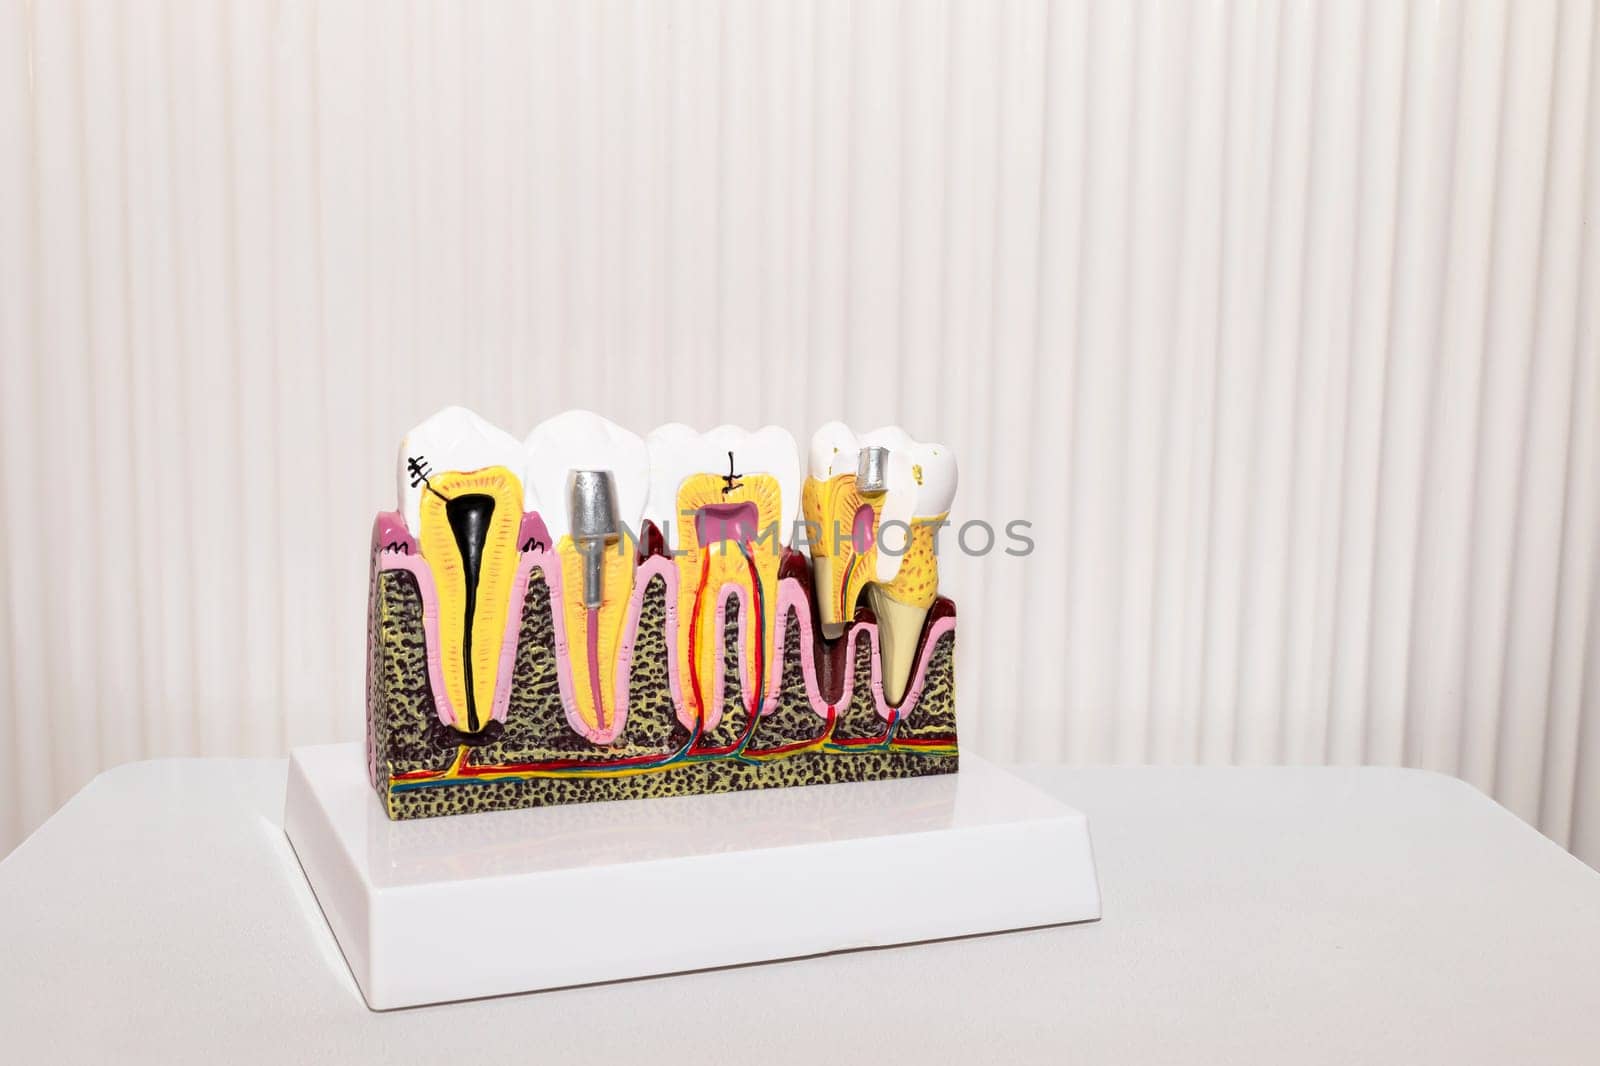 Mockup Dental Tooth Implant, Bridge Or Crown Model On Table, White Background, Copy Space. Dummy Template Human Jaw Oral Dentures. Prosthesis On Metal Peg. Horizontal Plane. High quality photo